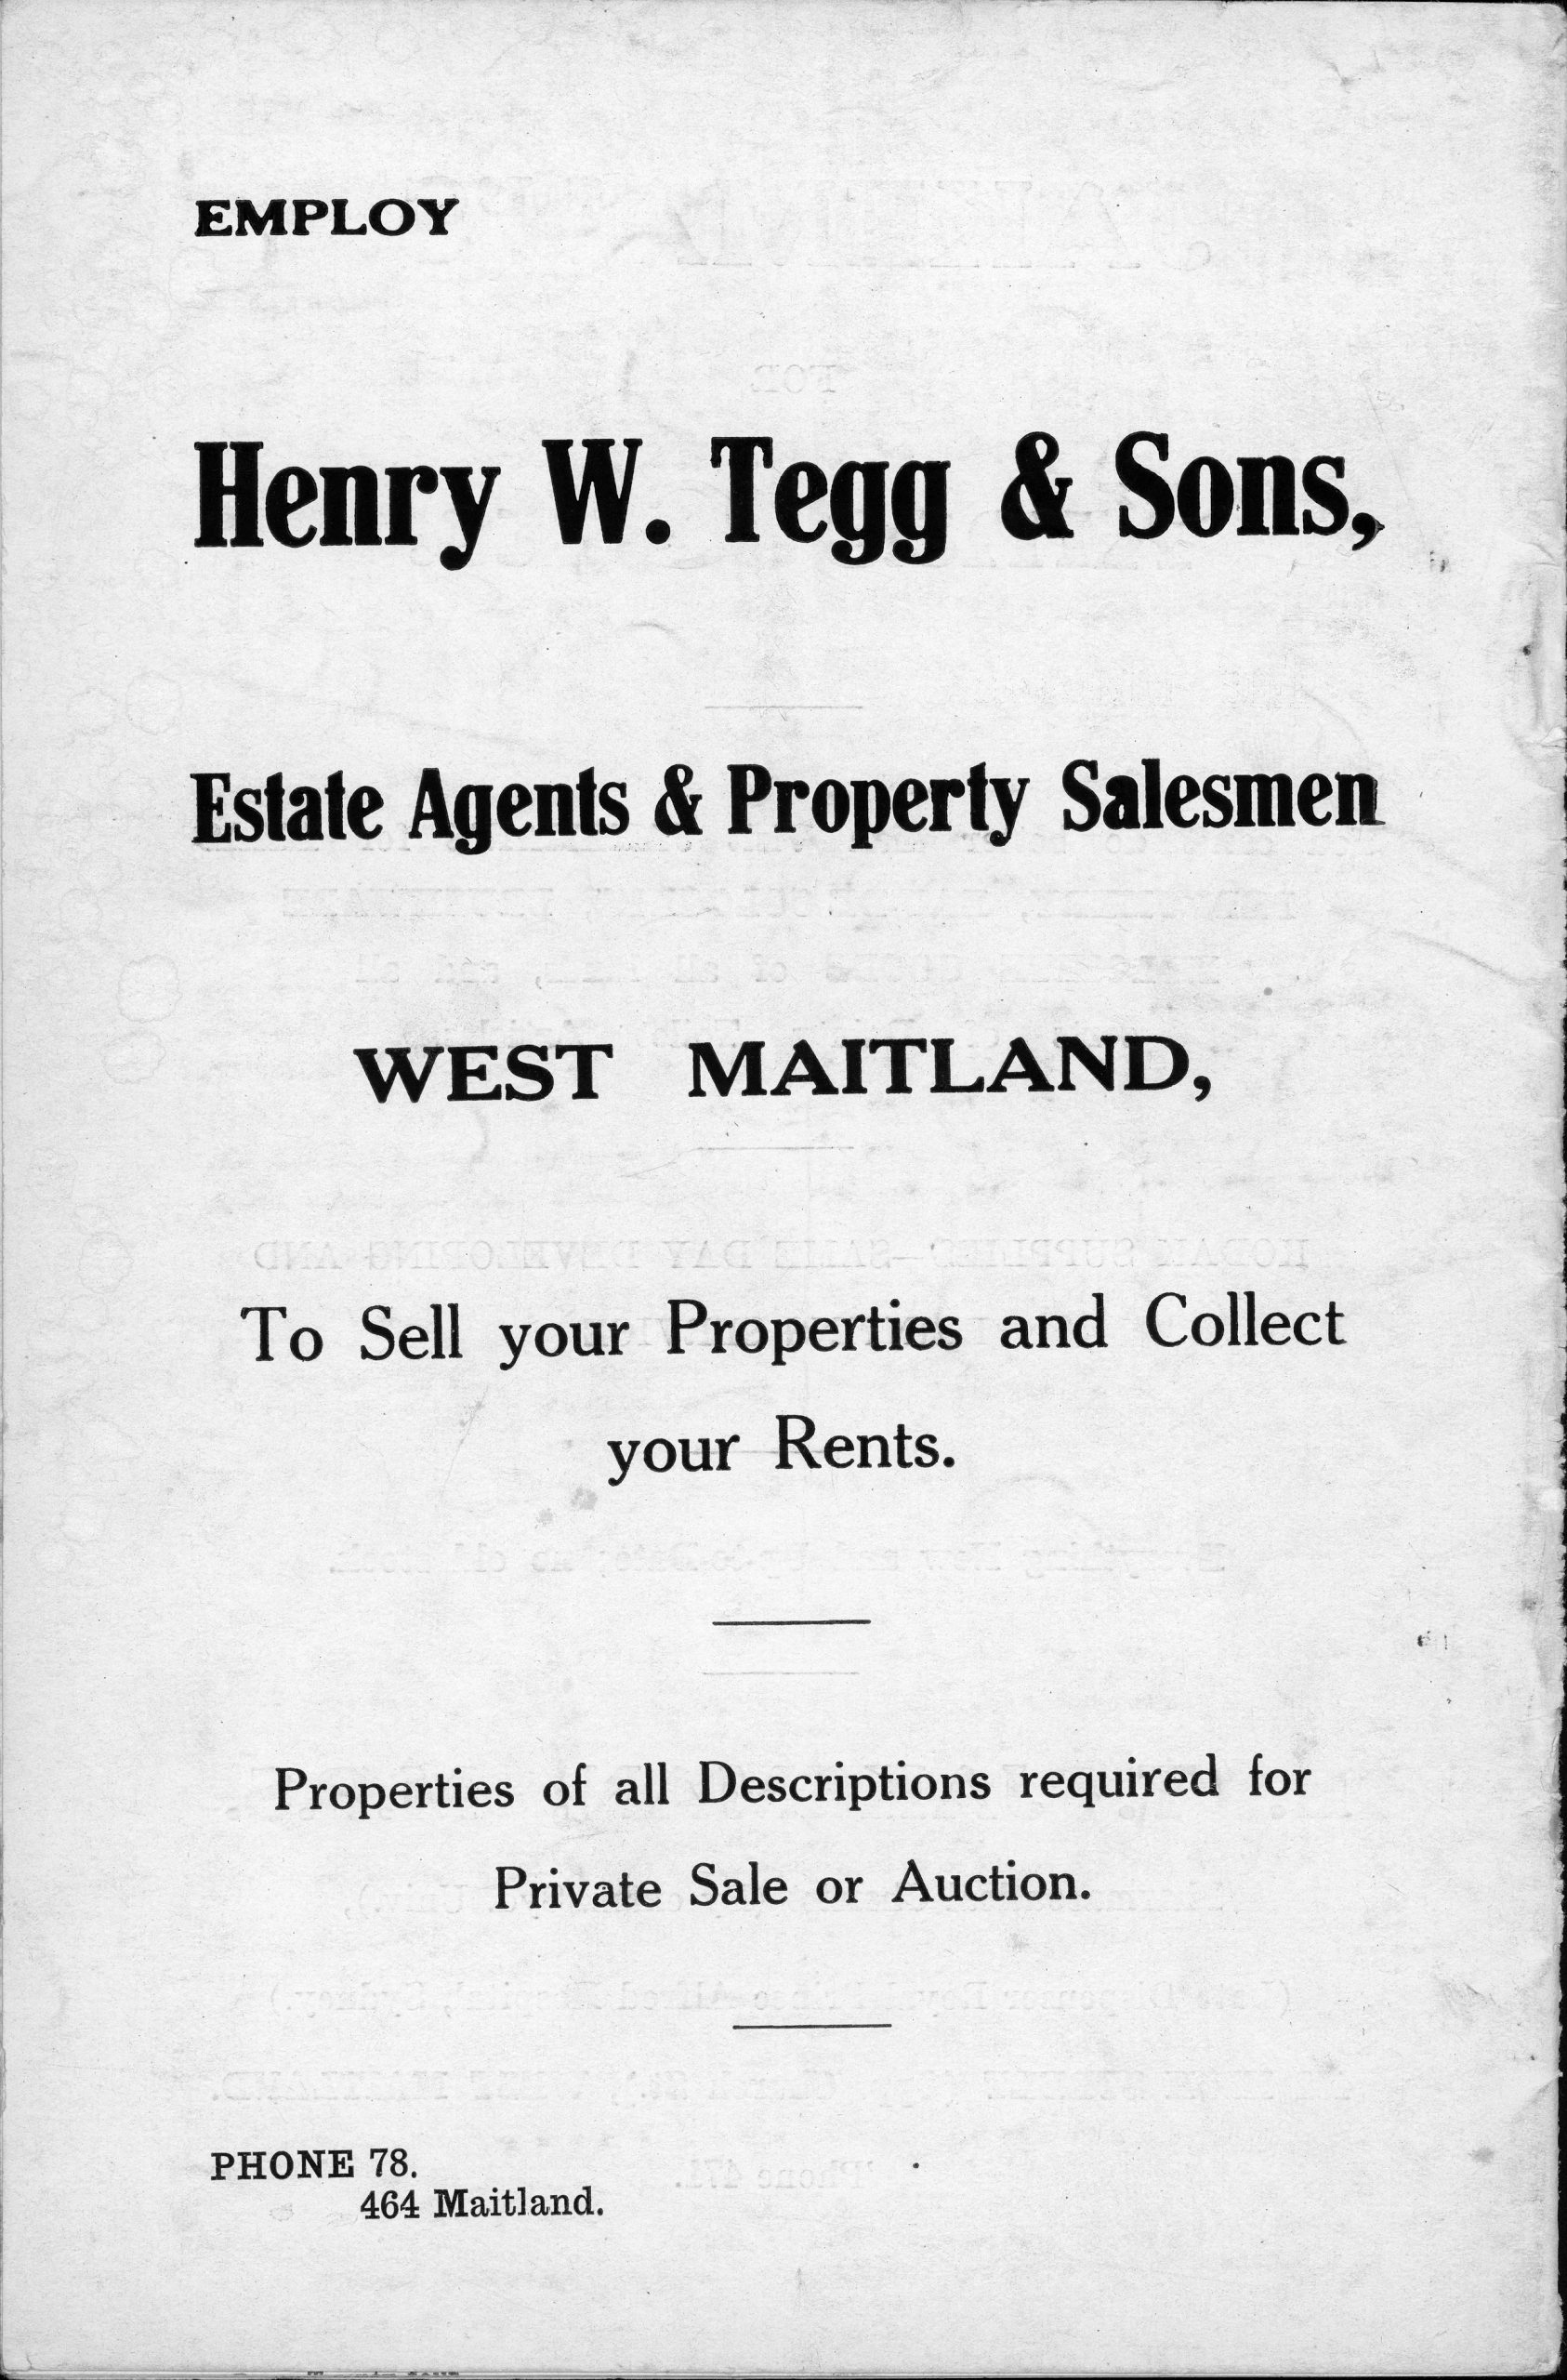 Advertisement for Henry W. Tegg & Sons, Estate Agents & Property Salesmen, in West Maitland